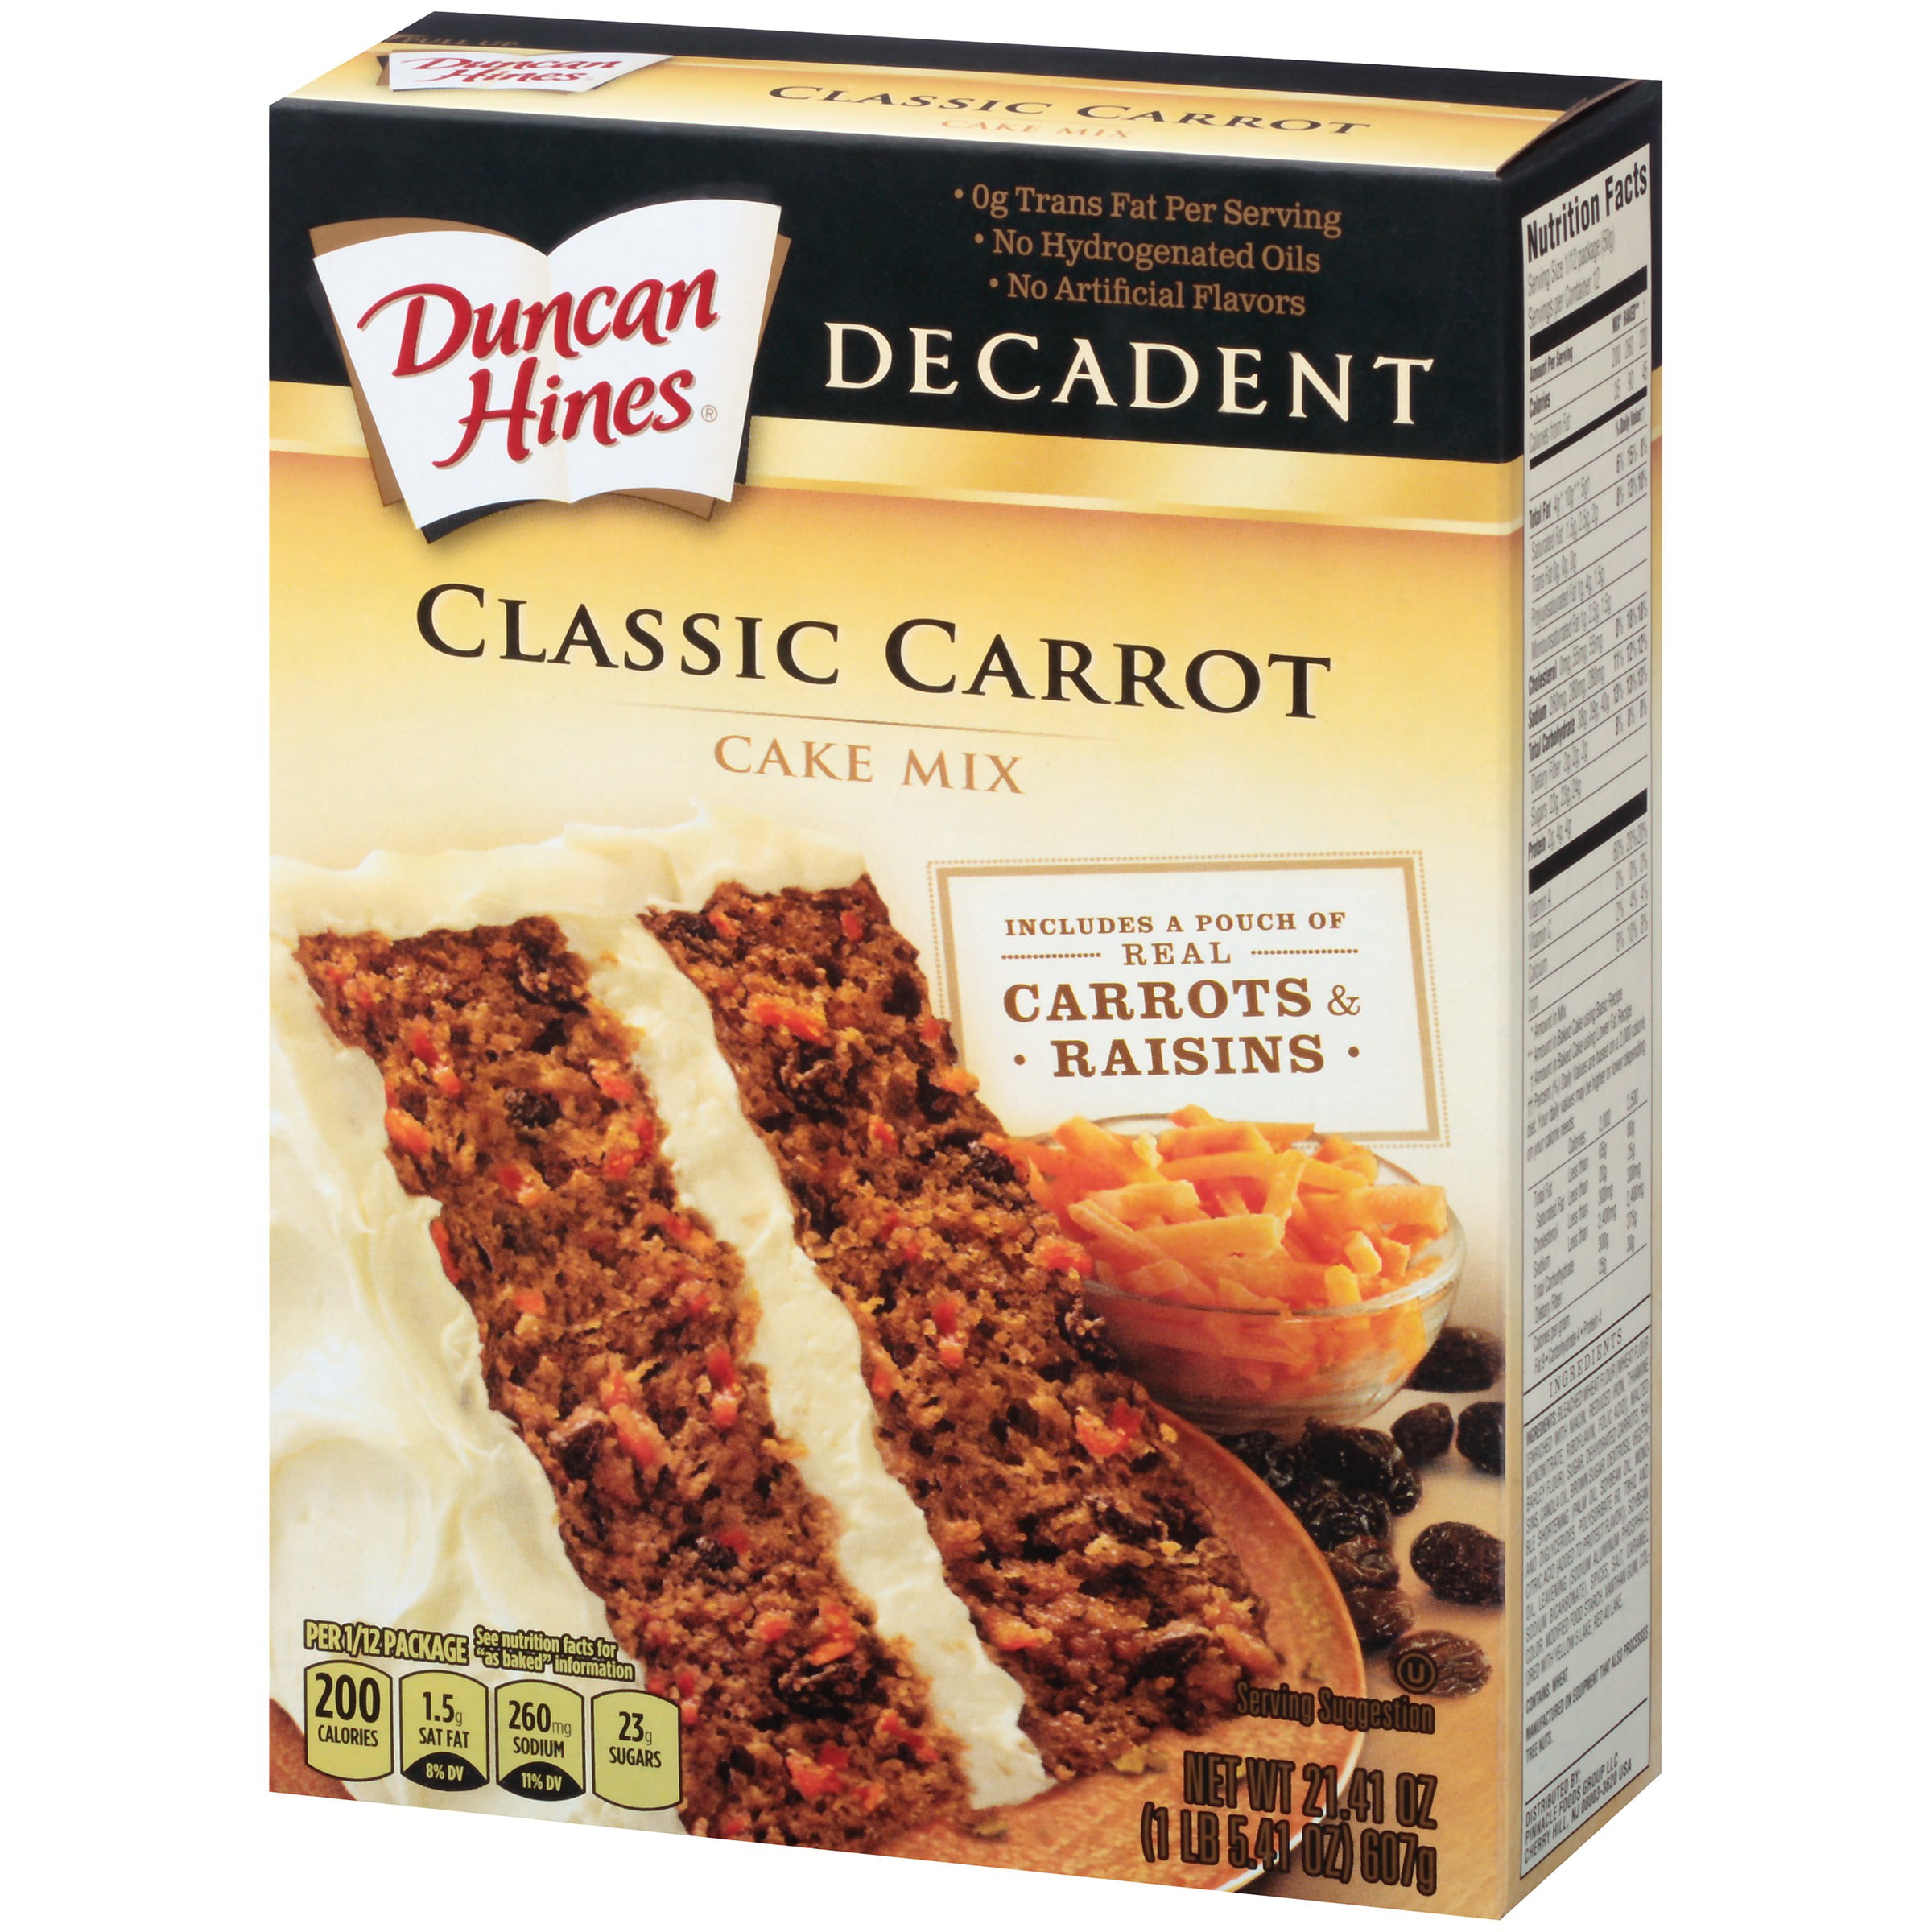 Duncan Hines Carrot Cake Cookie Recipes : Carrot Cake Cookies With Coconut Cream Cheese Frosting W Boxed Cake : Check out these trending cake recipes, forum posts, cake decorating turorials and more!